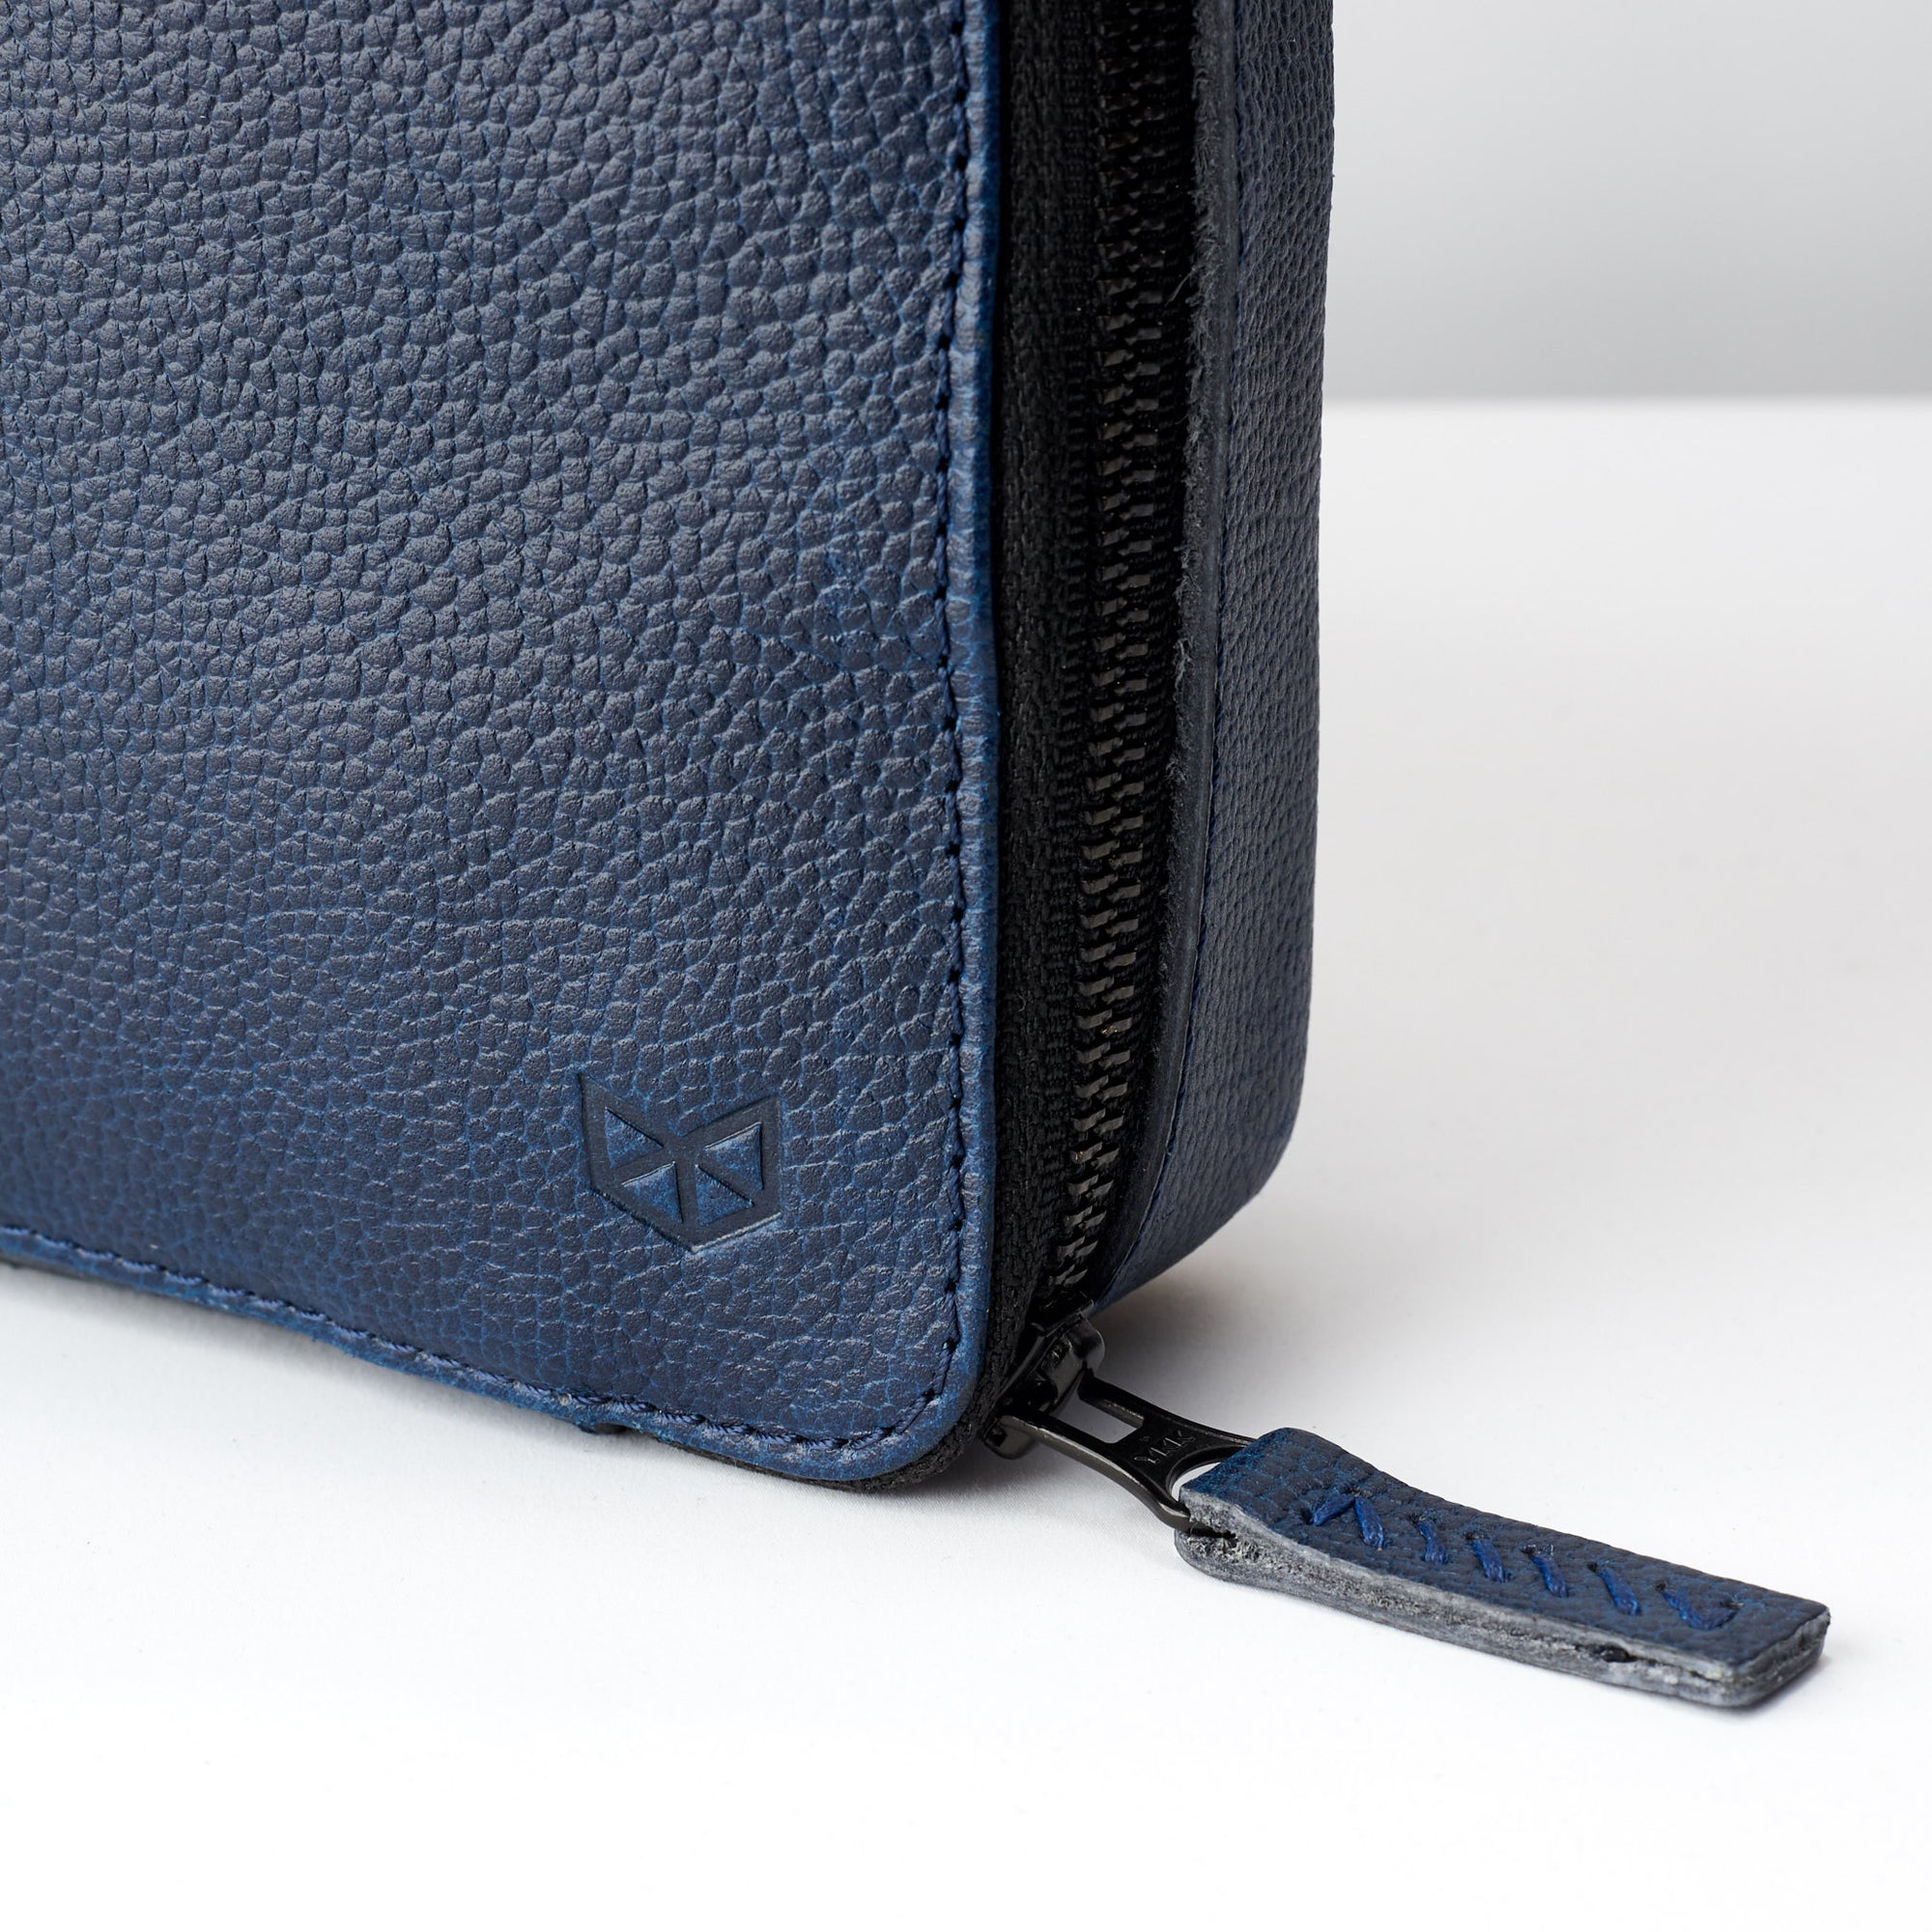 Hand stitched pull tabs. Best travel tech organizer navy blue by Capra Leather